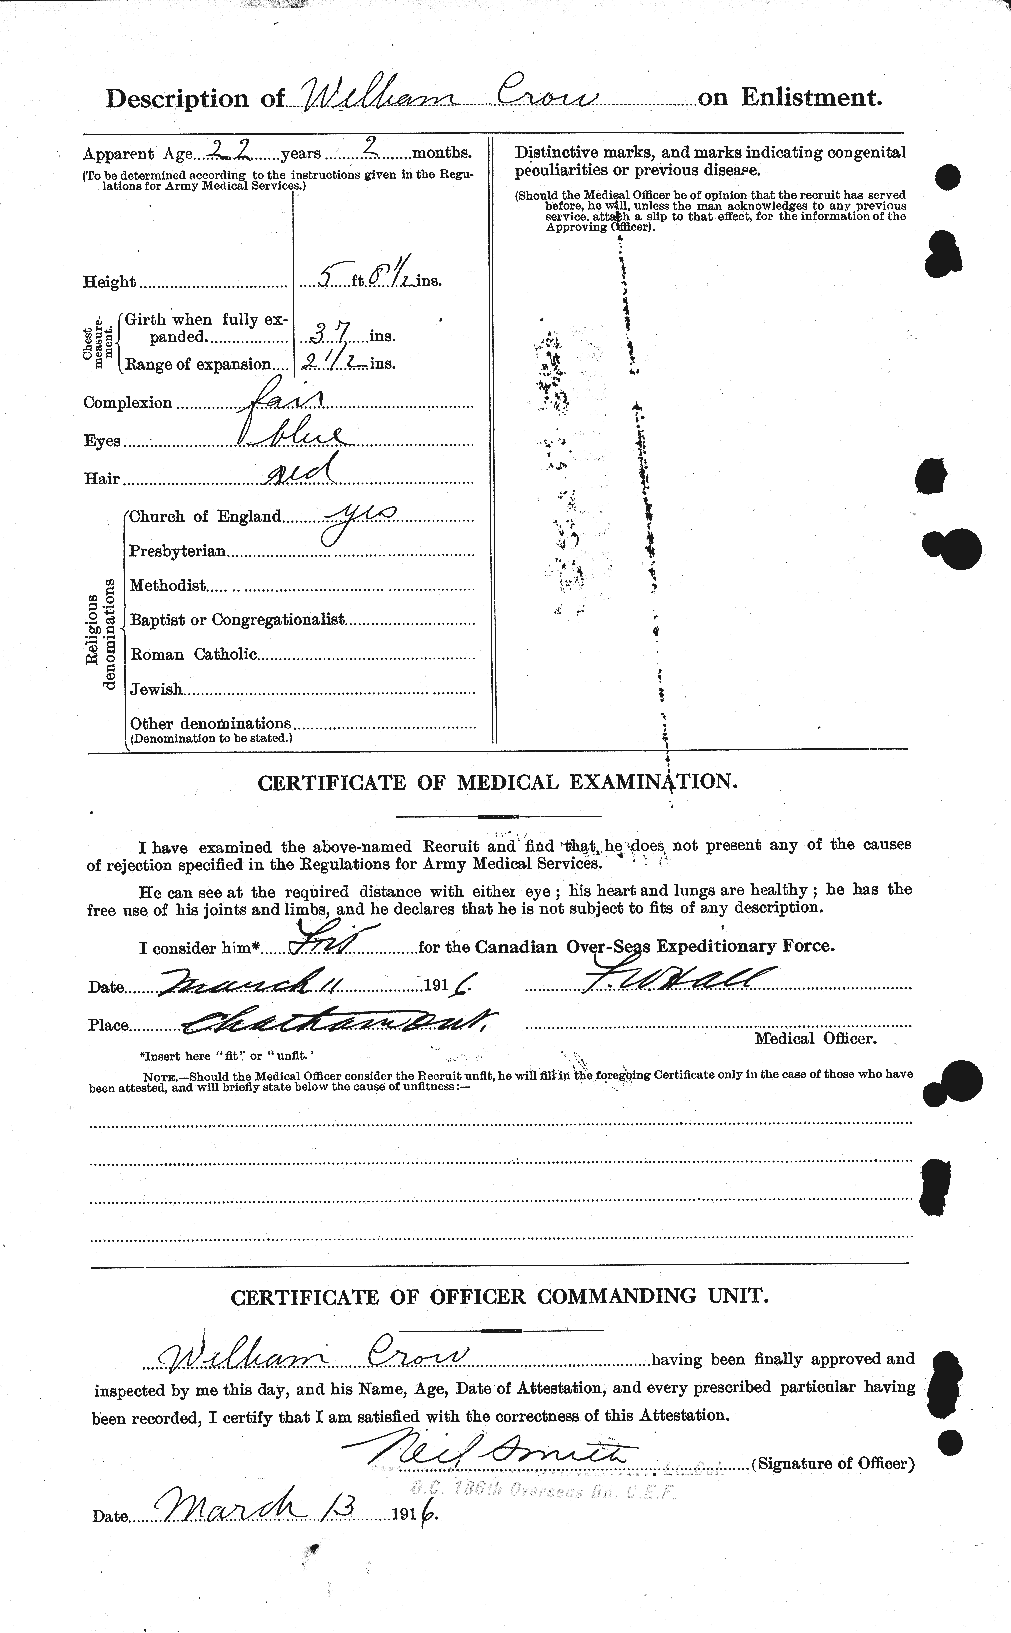 Personnel Records of the First World War - CEF 065527b